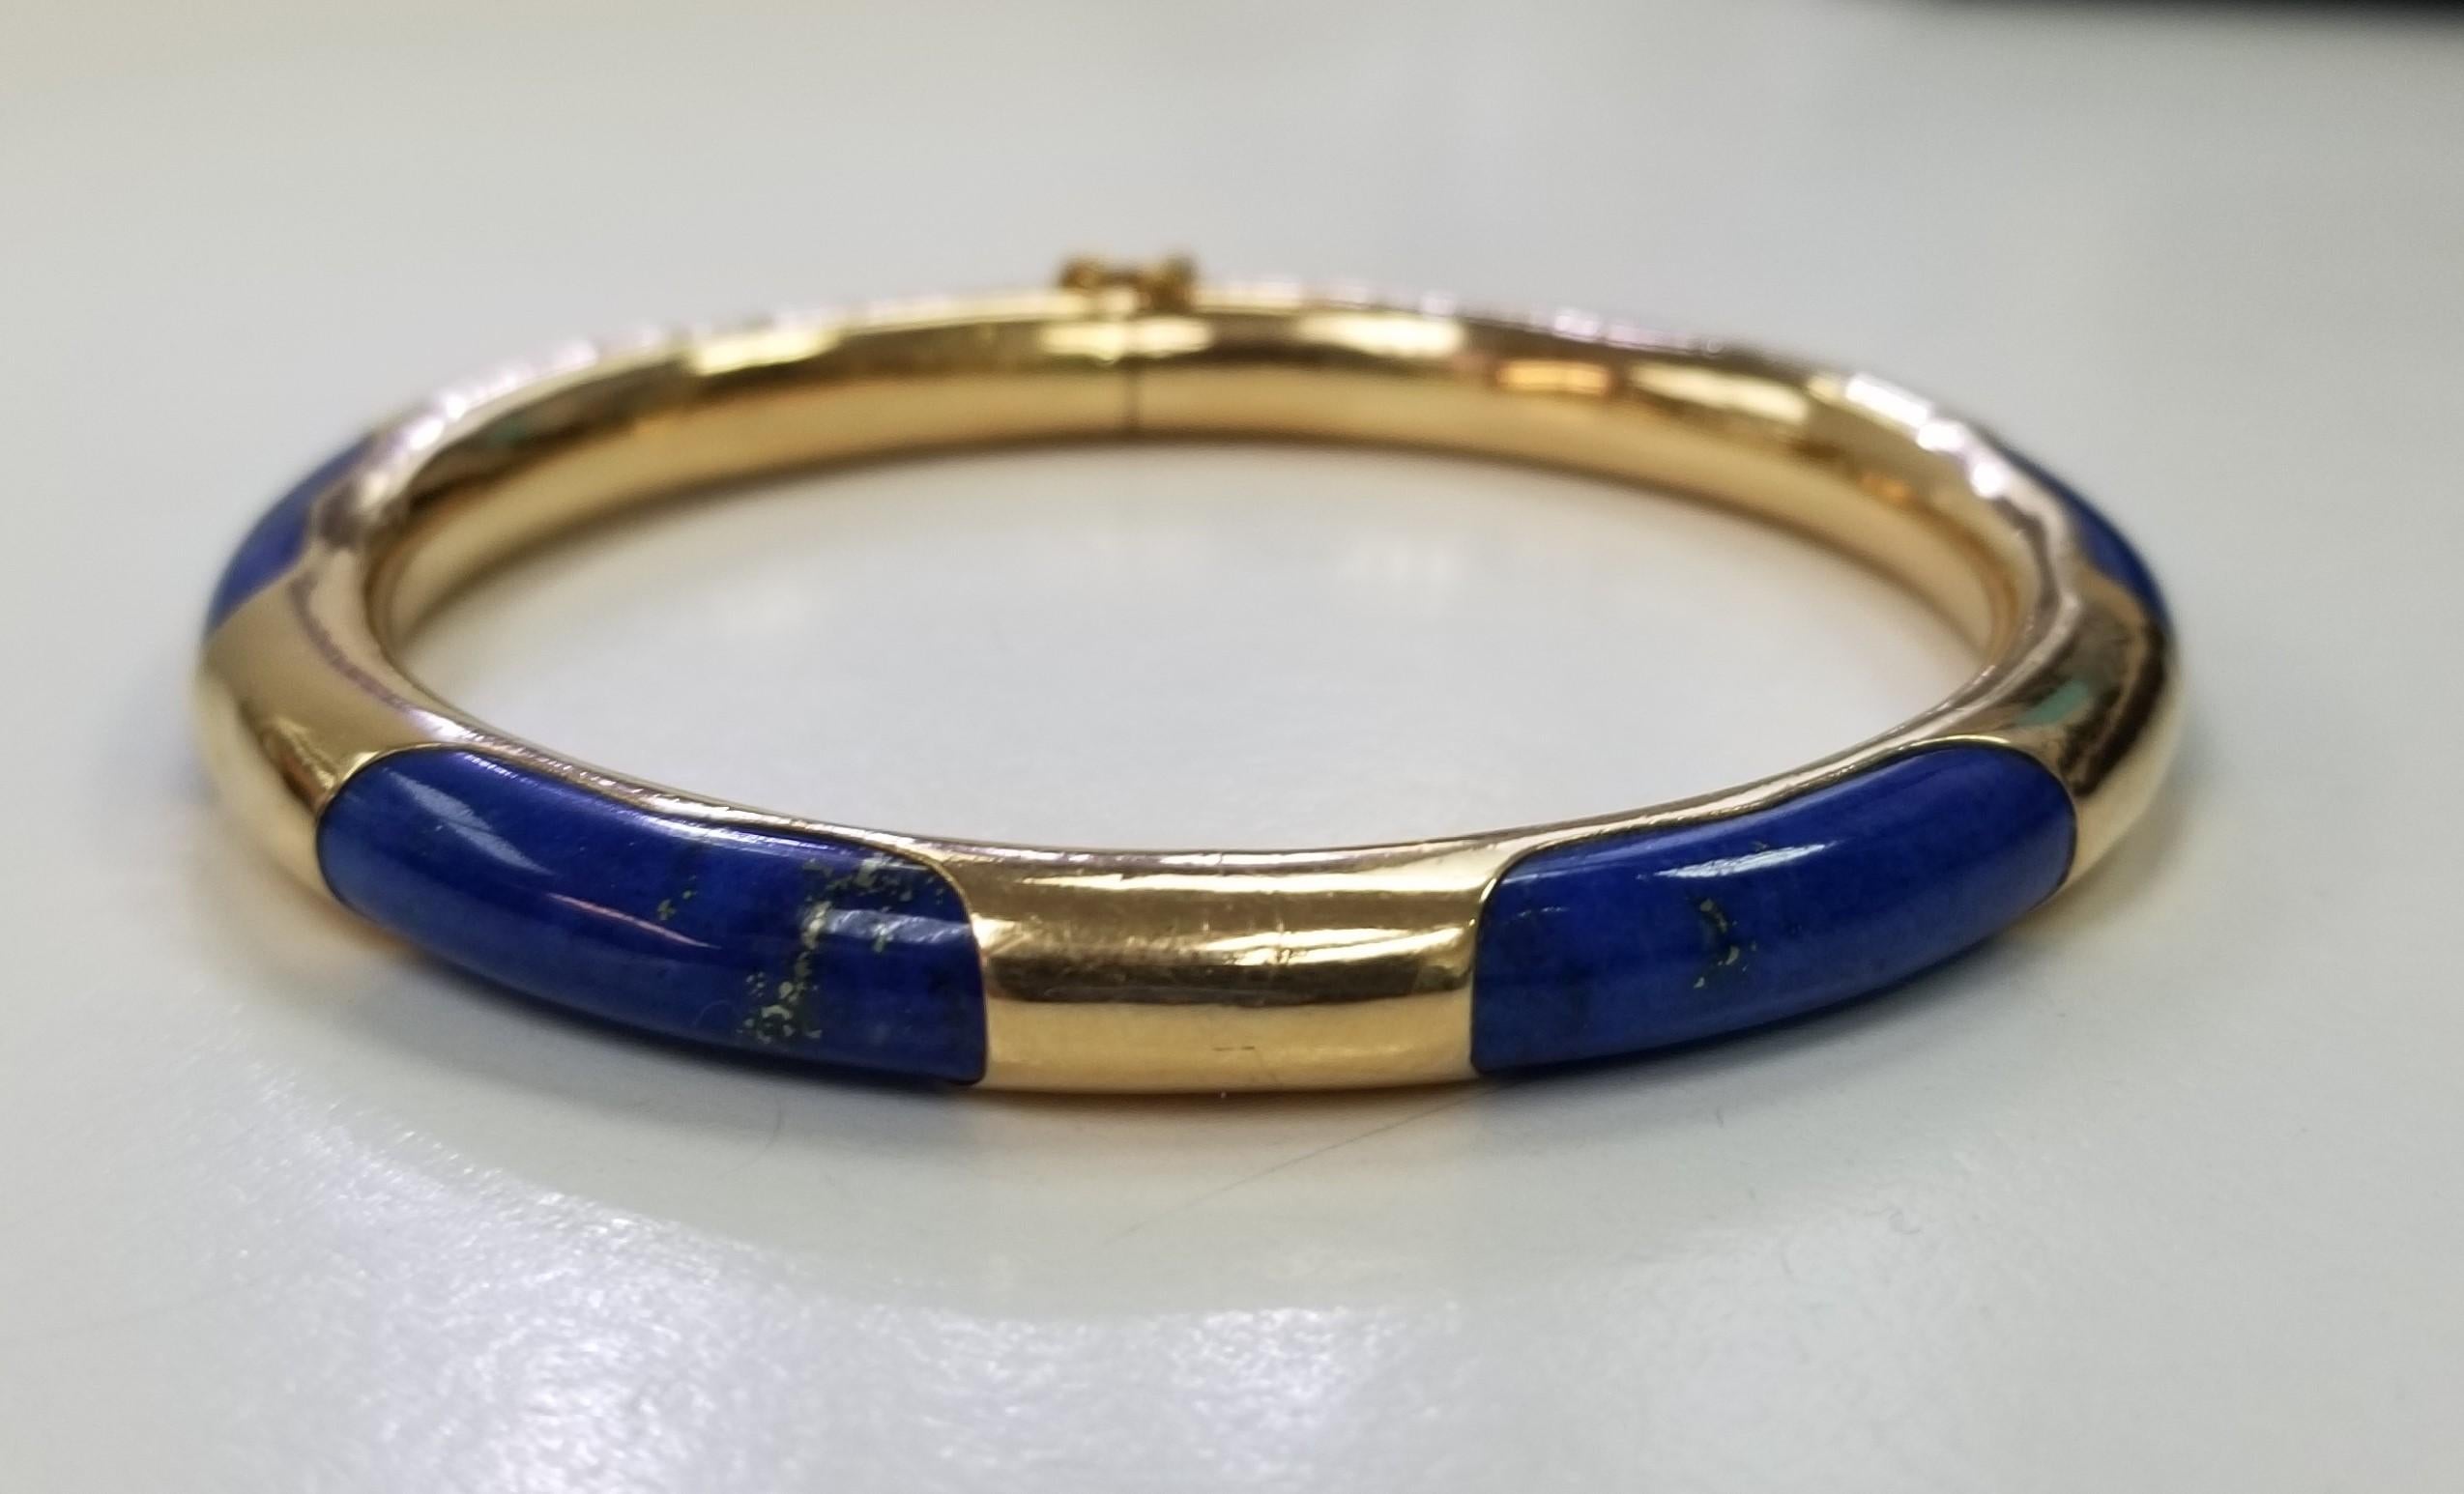 14k Gold and Lapis Lazuli Bangle Bracelet In Excellent Condition For Sale In Los Angeles, CA